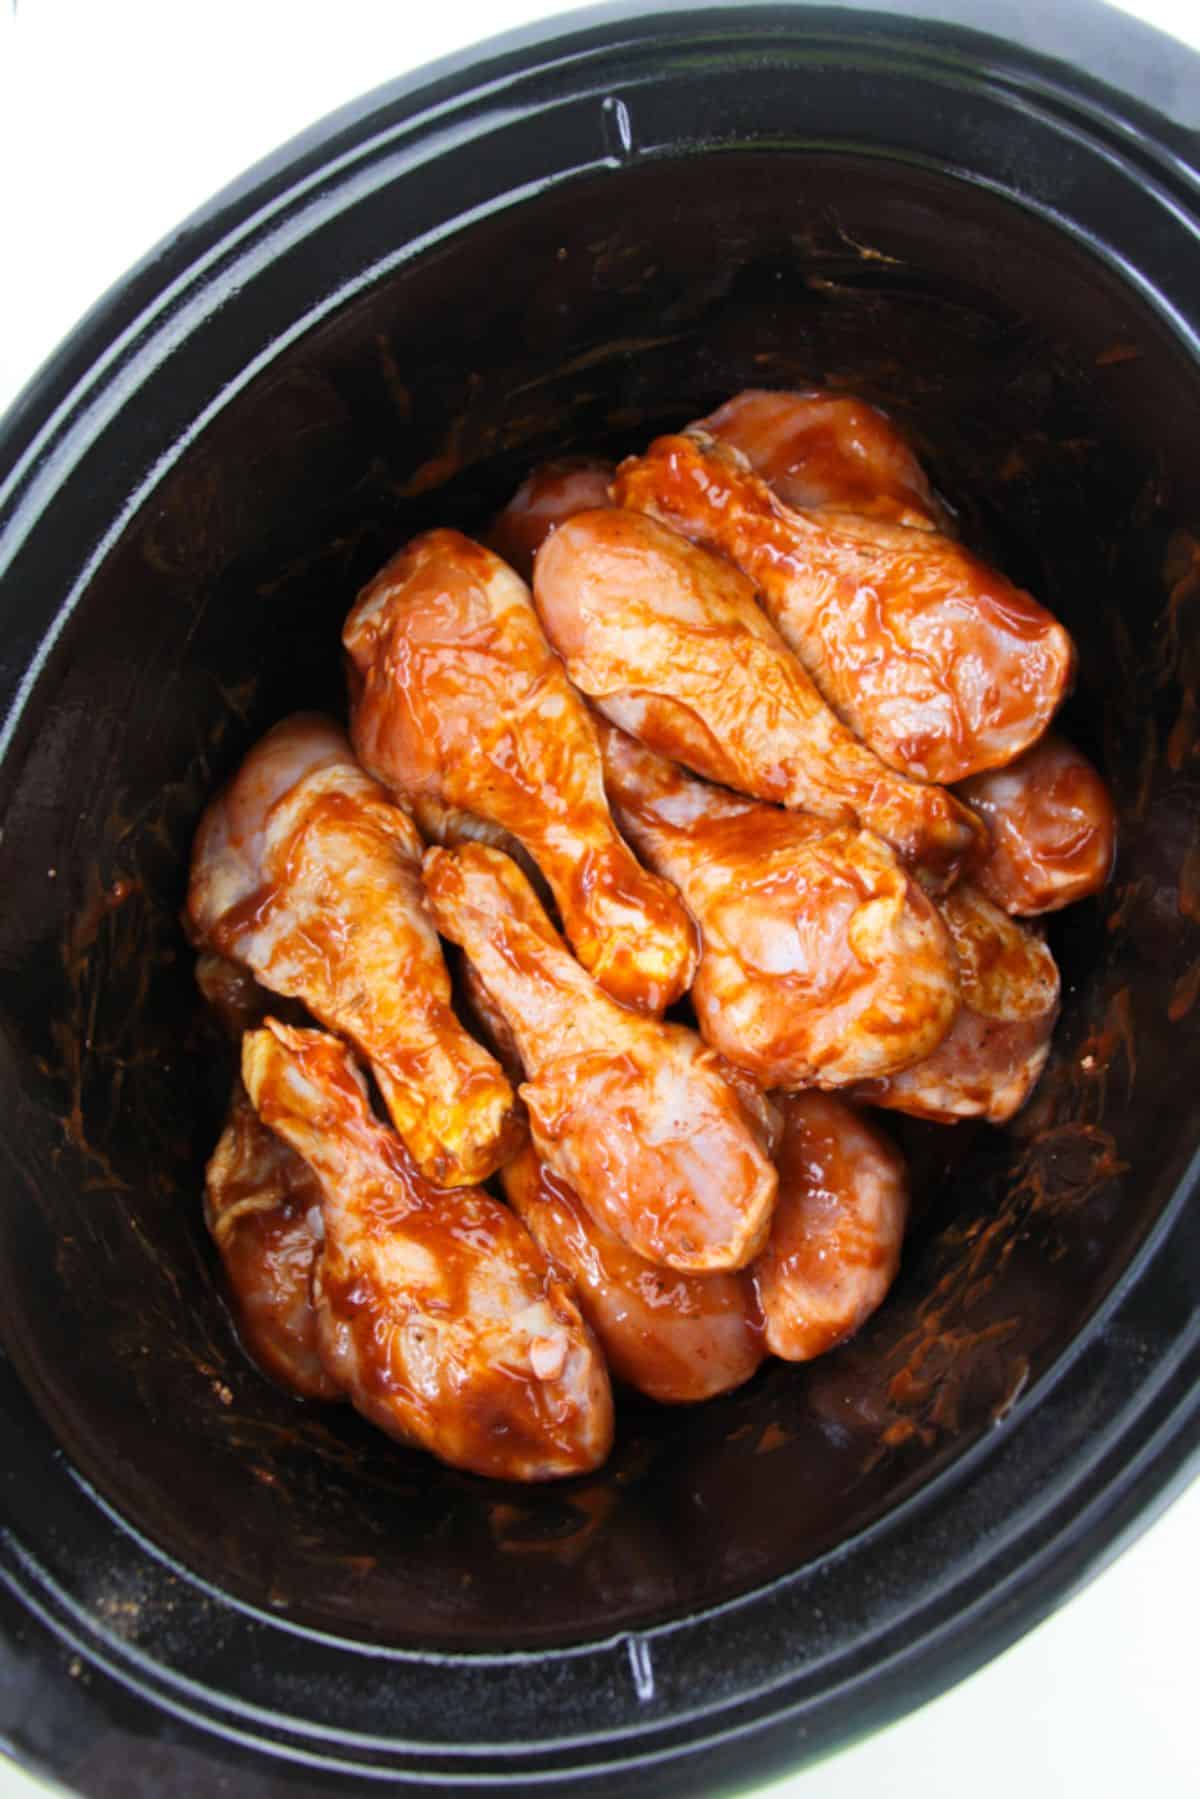 Chicken legs coated with bbq sauce inside the slow cooker.